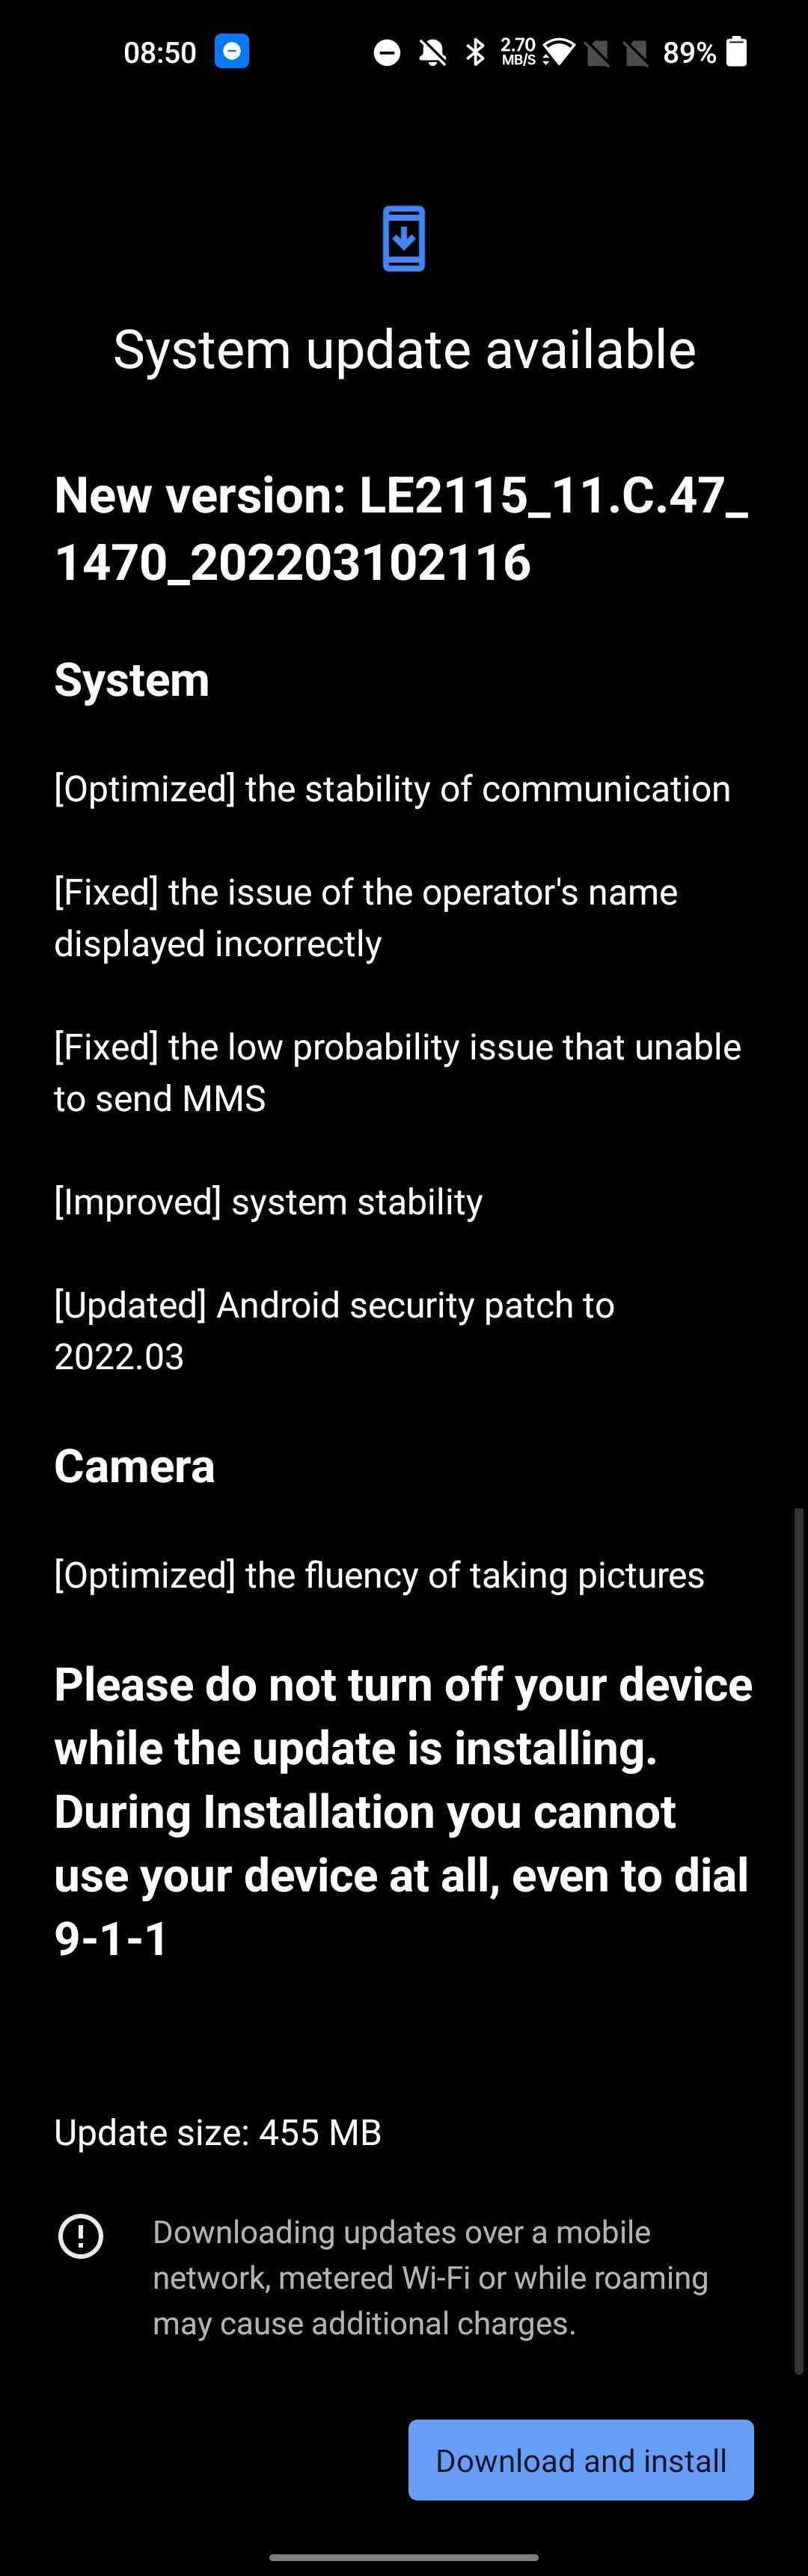 OnePlus 9 Pro with OxygenOS C.47 patch and March 2022 security update